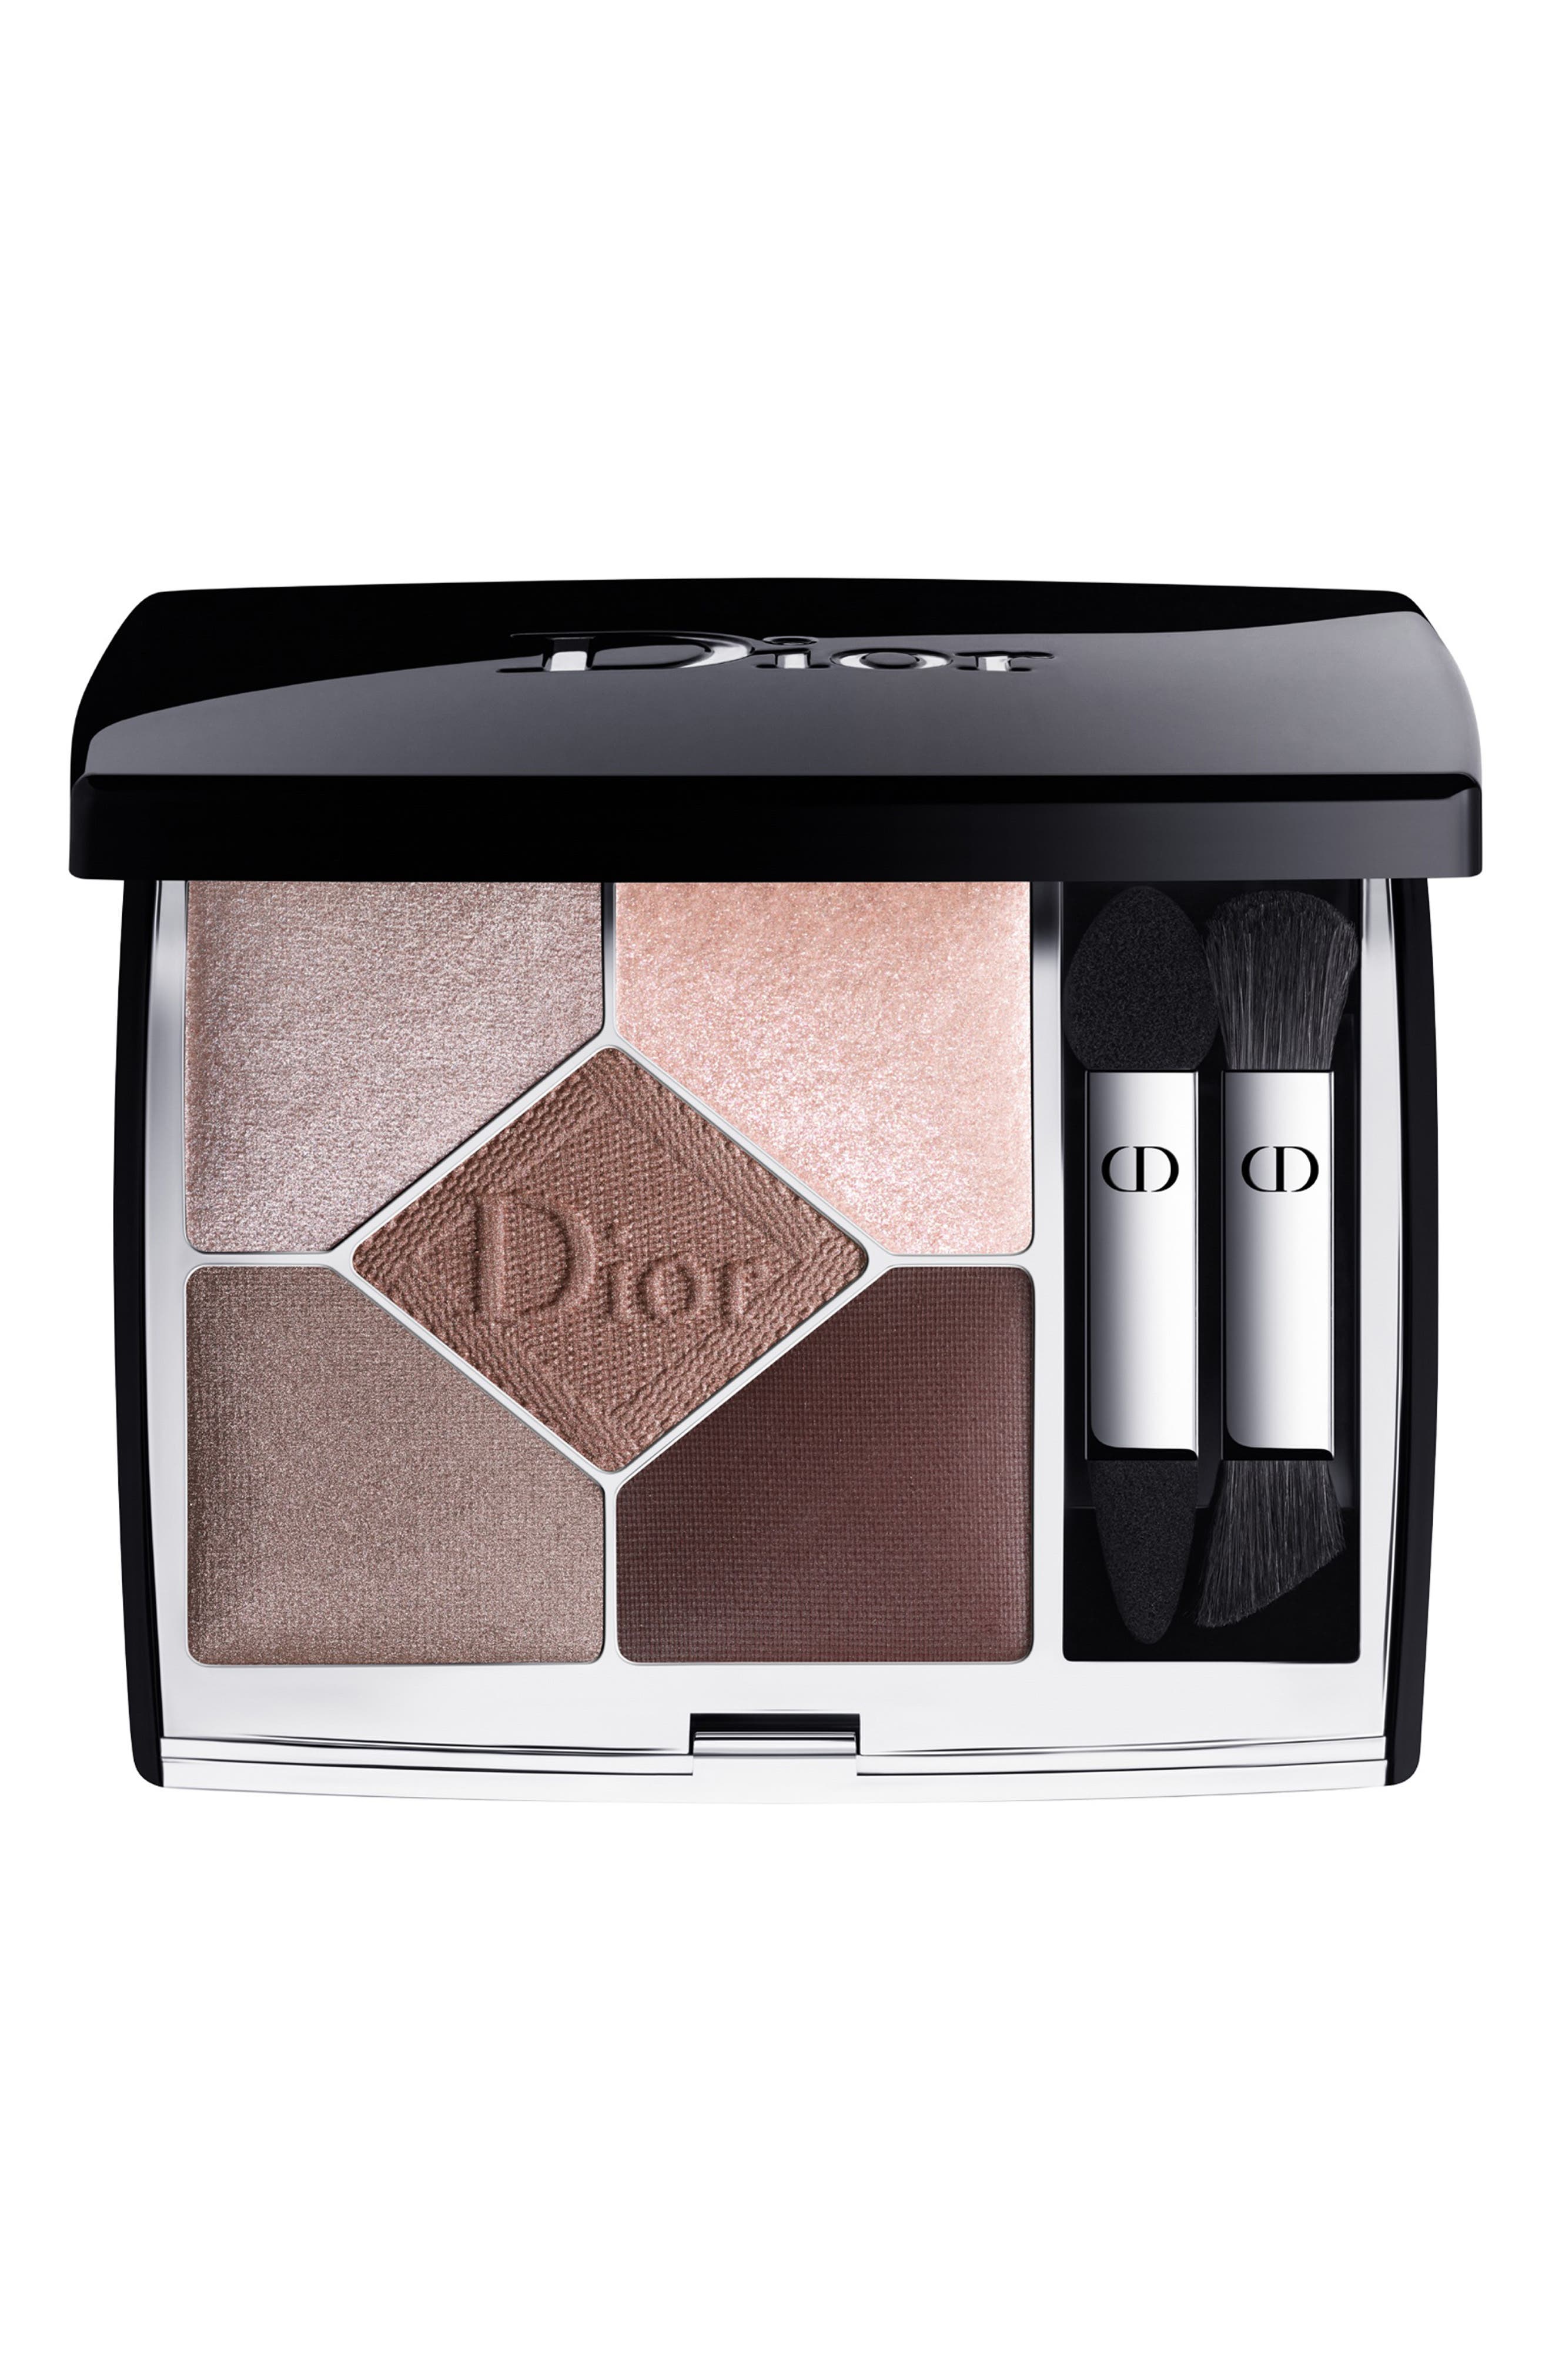 Dior 5 Couleurs Couture Eyeshadow Palette in 669 Soft Cashmere